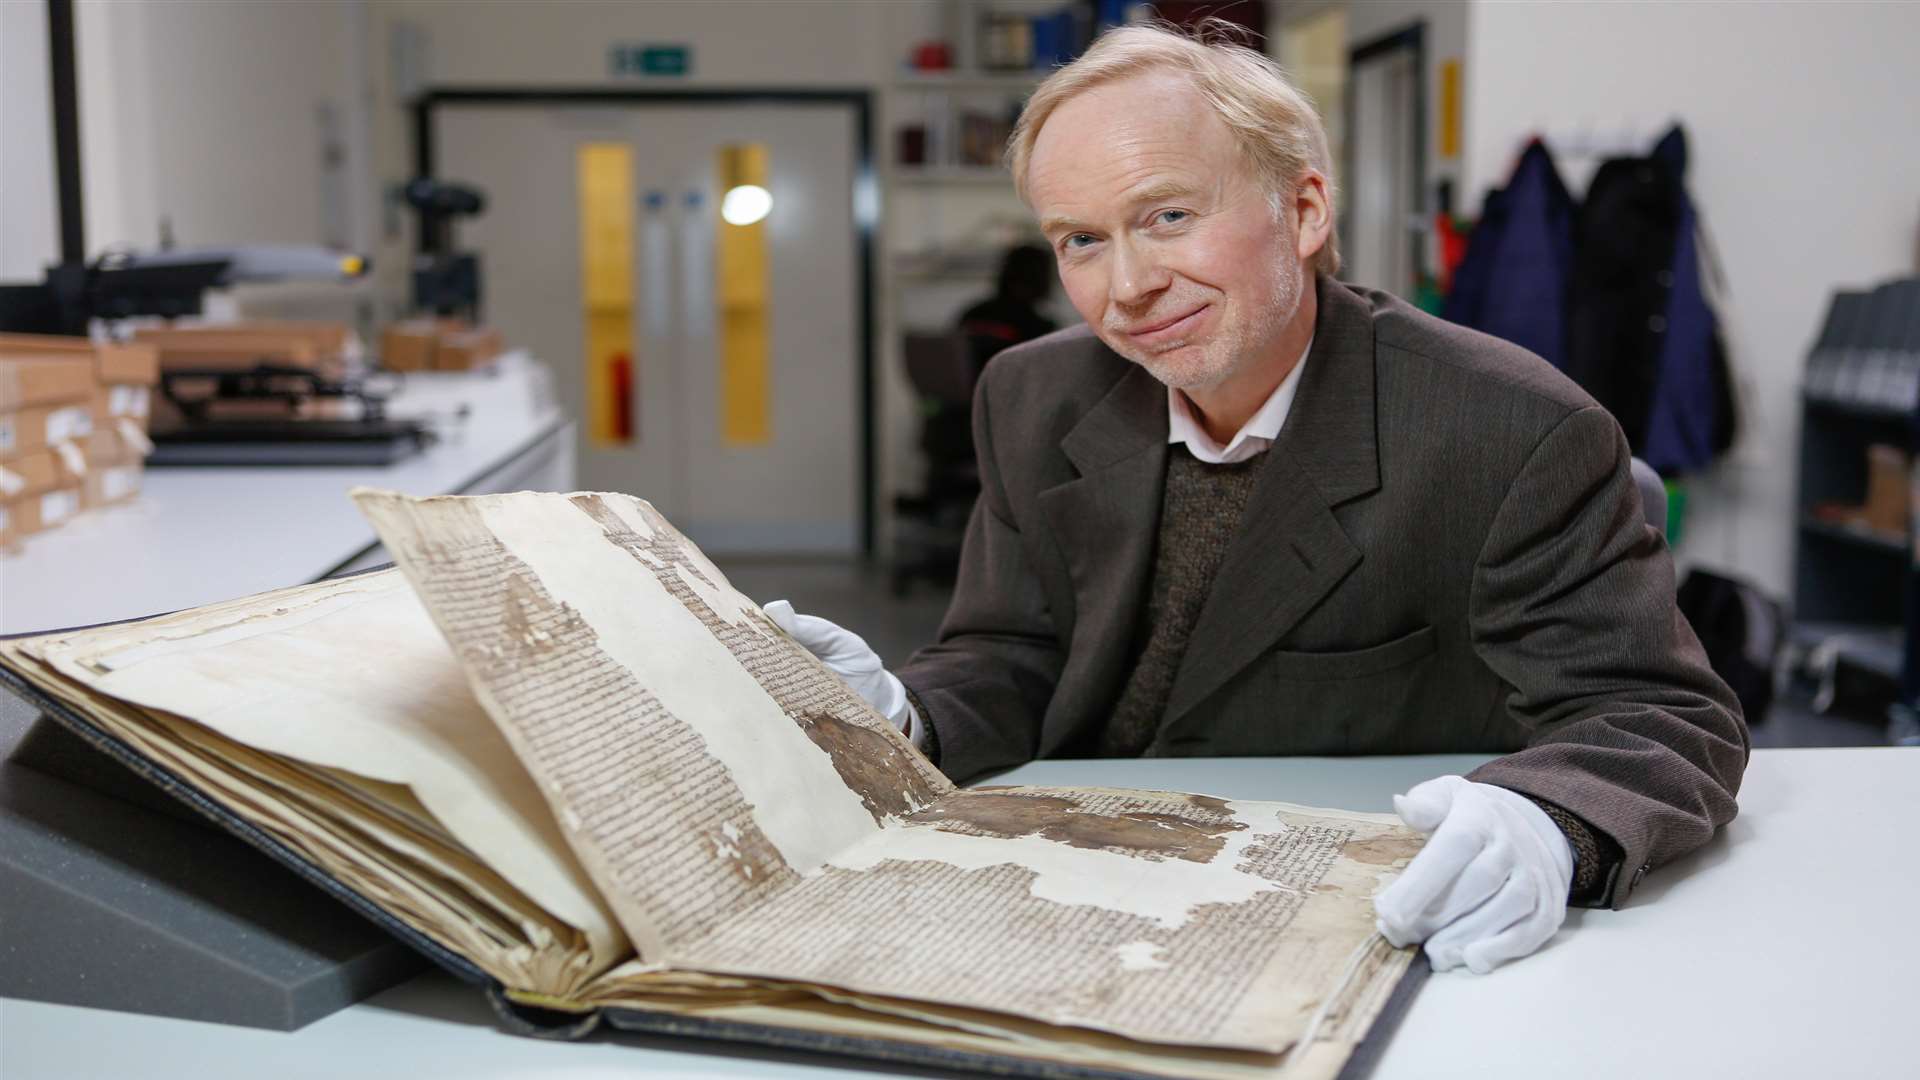 Dr Mark Bateson who discovered the Sandwich Magna Carta in Maidstone. Picture by Matthew Walker